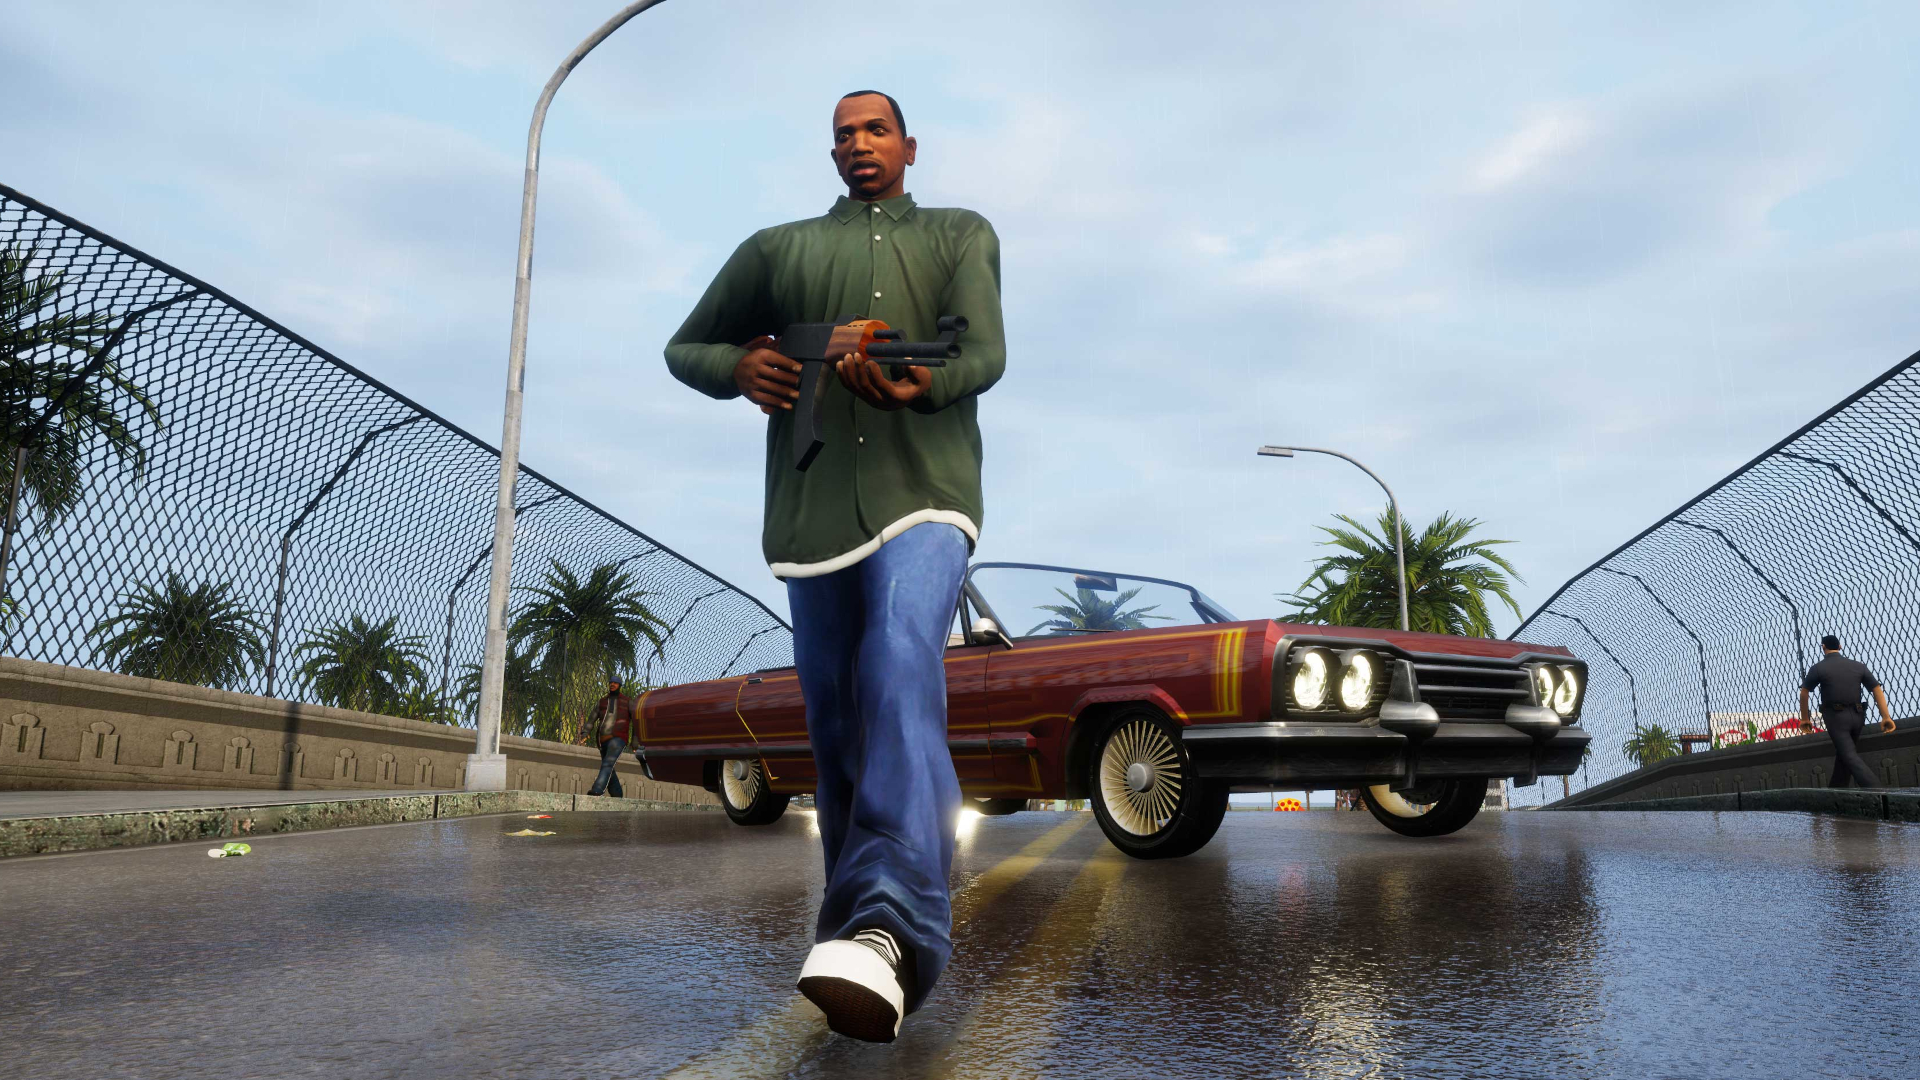 GTA: The Trilogy Was Based On The Mobile Rereleases Of The Original Trilogy  